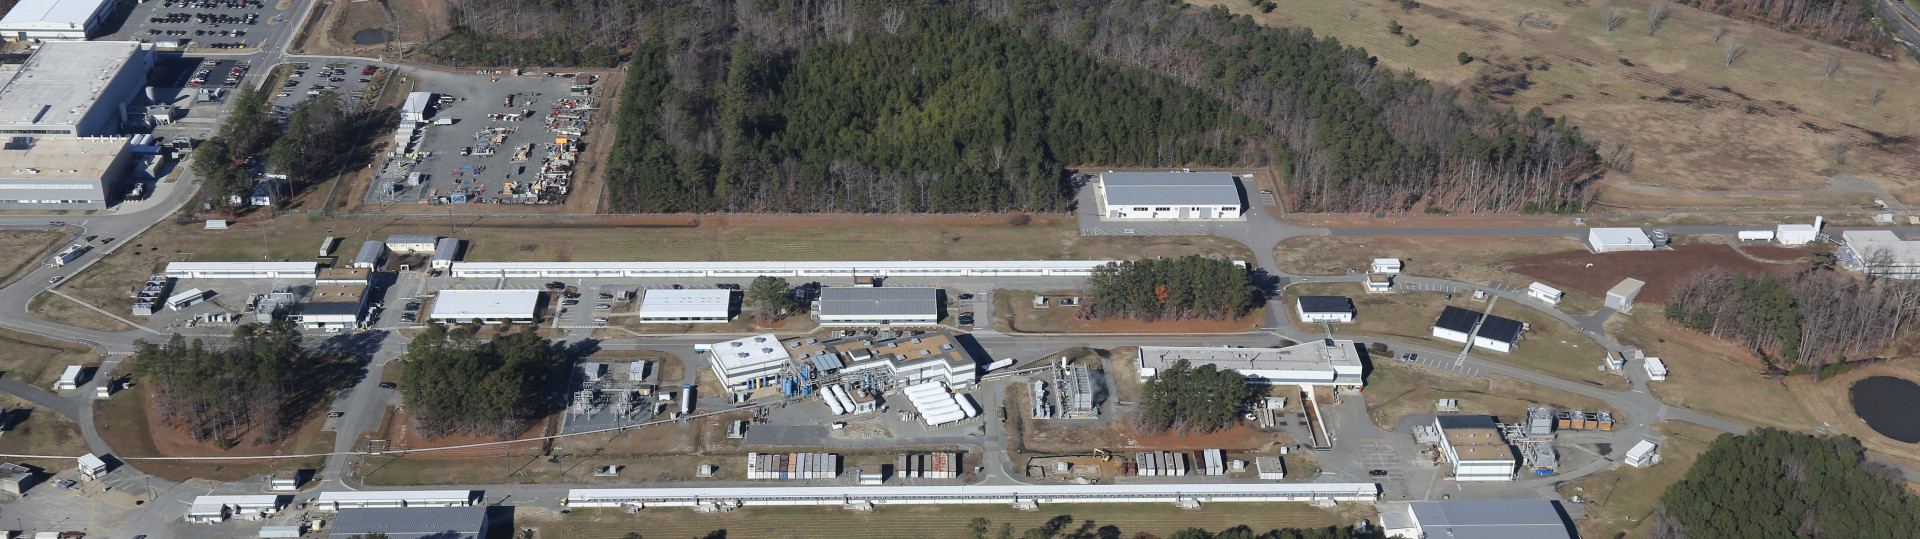 An aerial photo of JLab's Campus